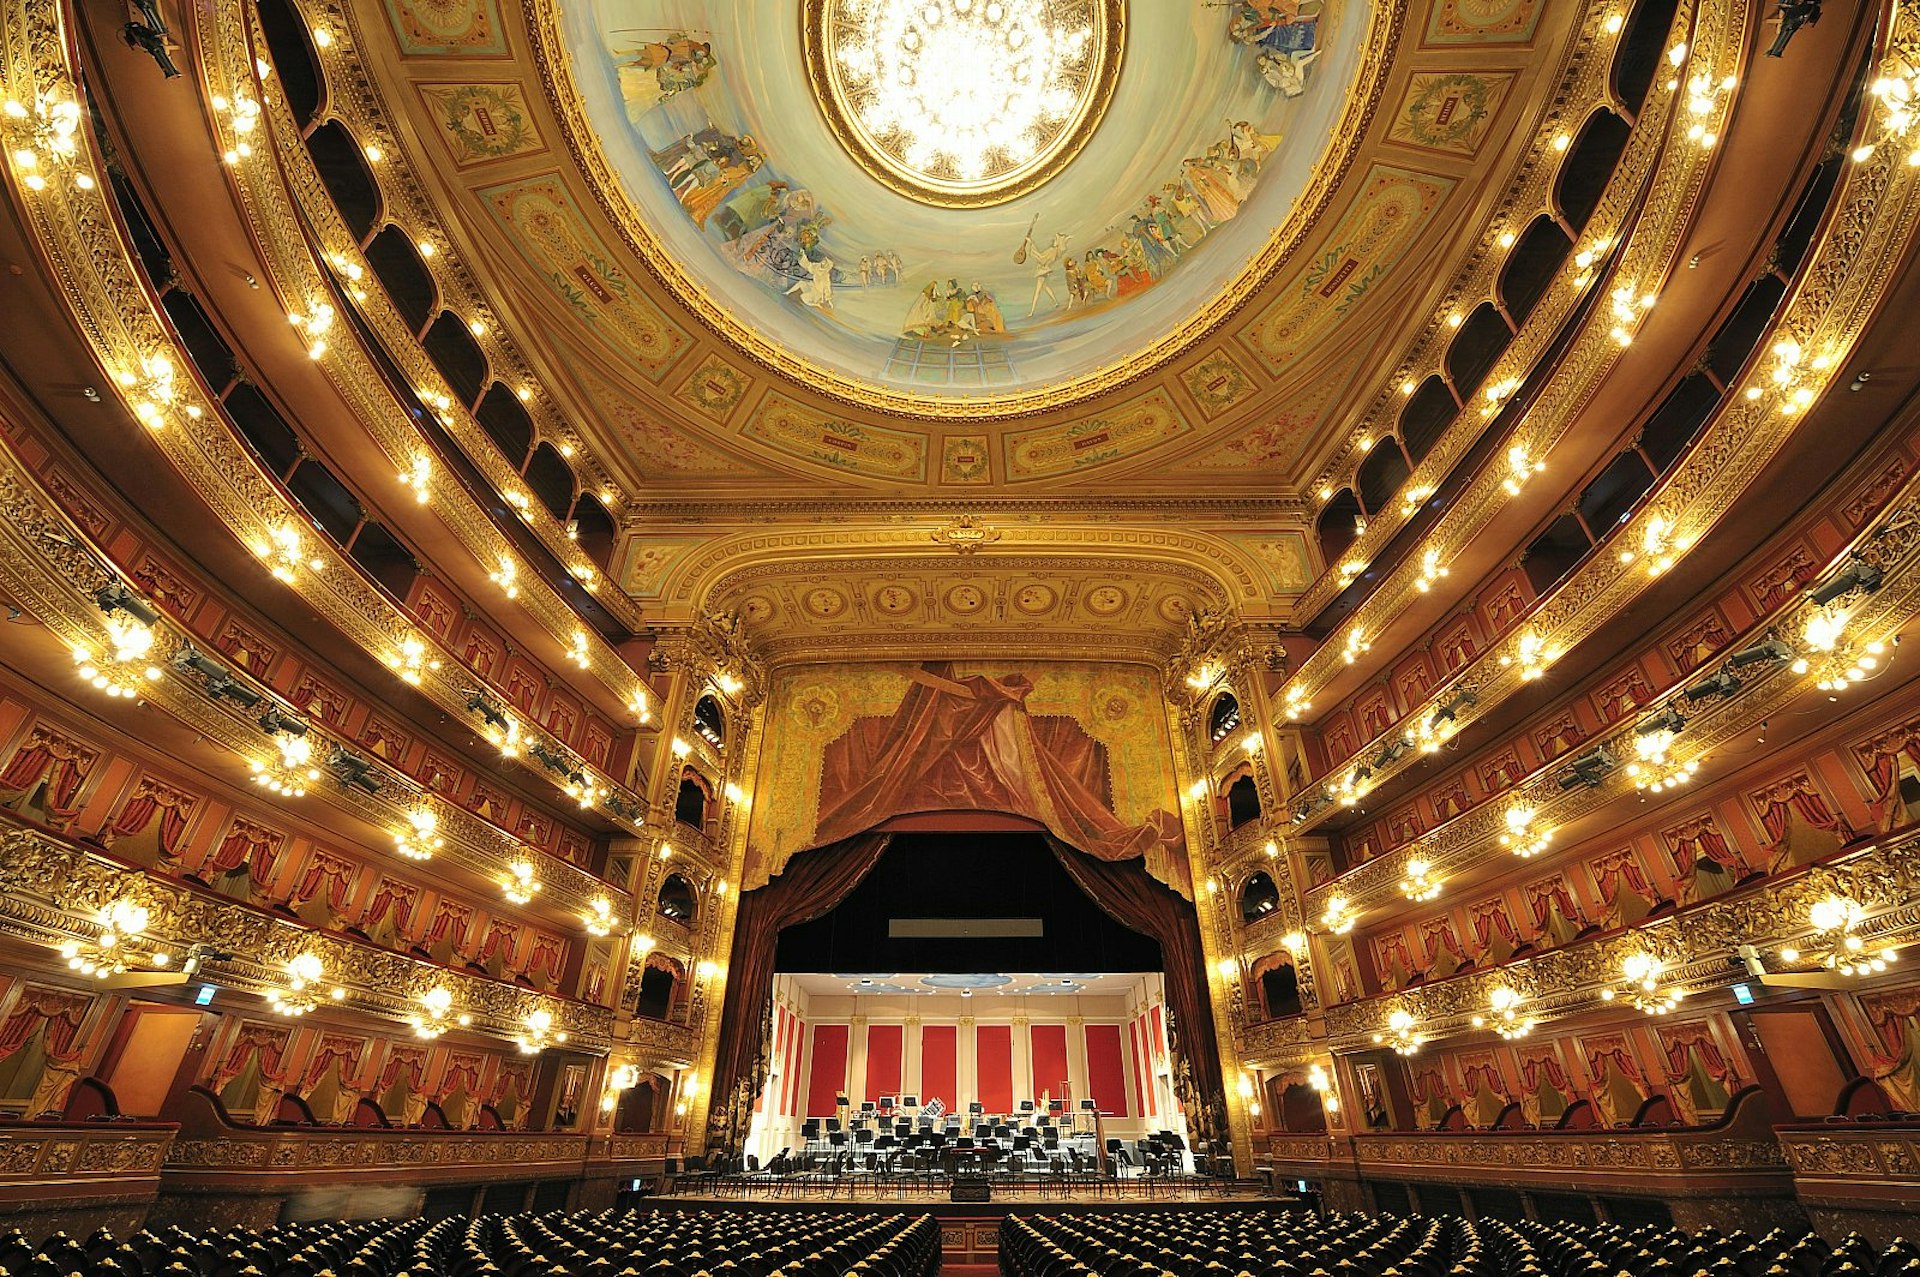 The opulent interior of Buenos Aires' Teatro Colón; we look towards the ornate, gilded stage, which has a frescoed ceiling above; either side of the theatre is lined with rows of handsome balconies containing boxes.